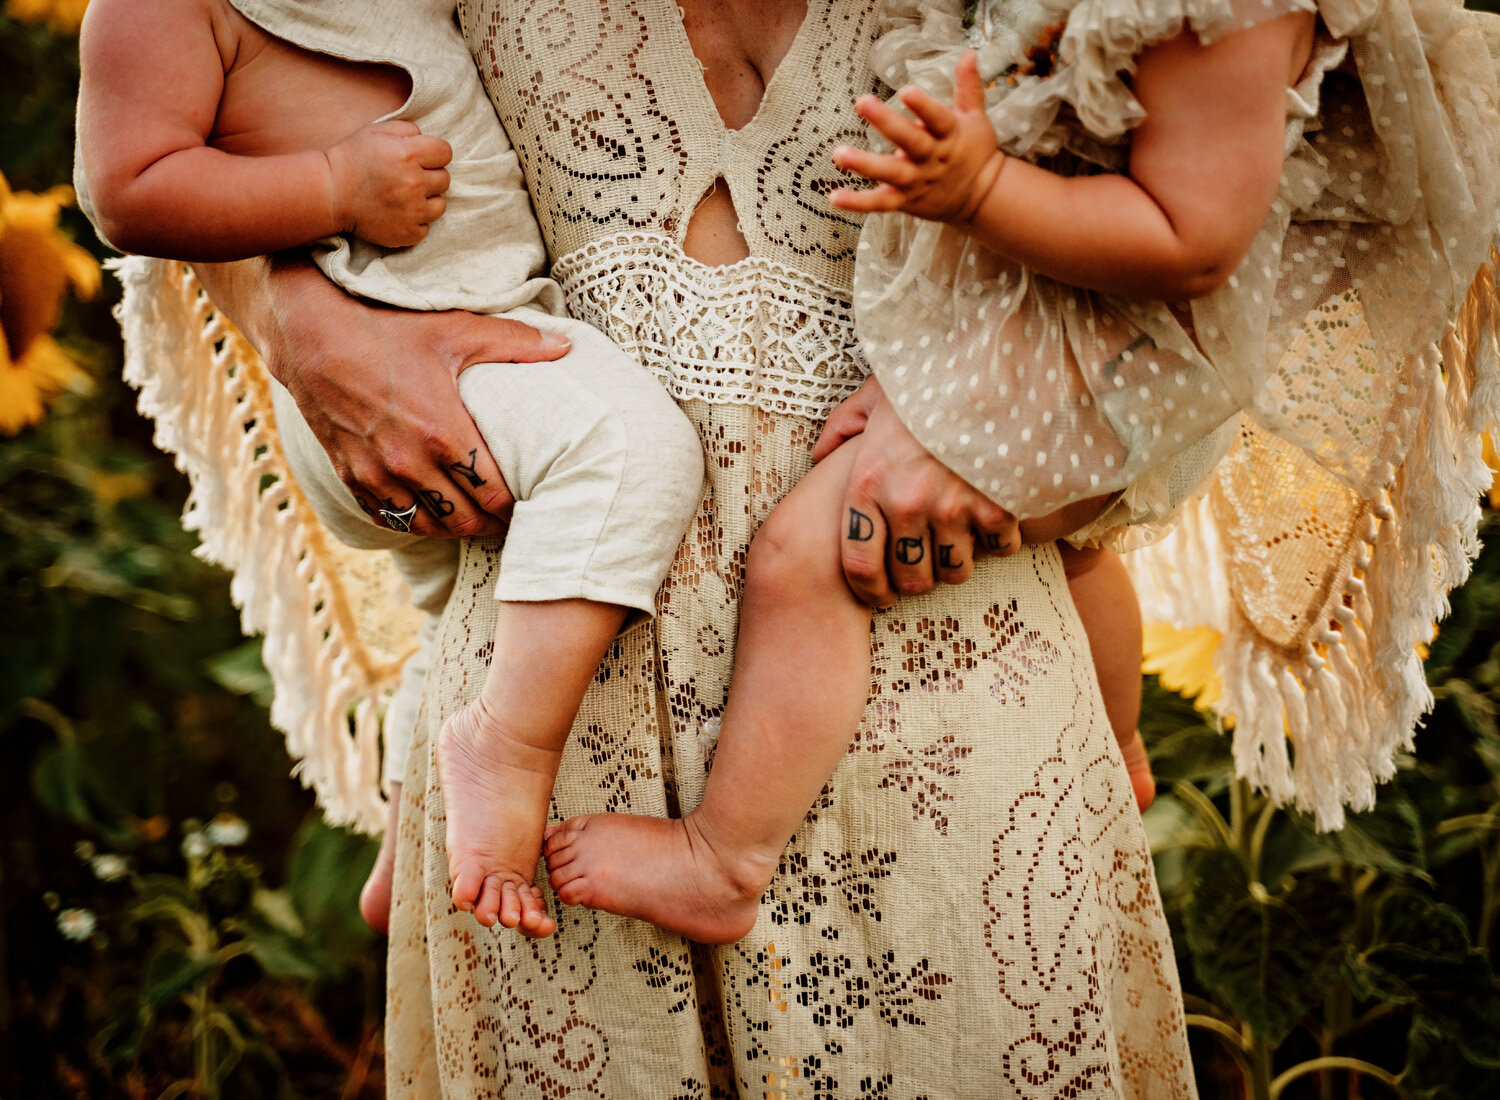  Beautiful family photo session in s big sunflower field. Young family with twins in boho outfits and flutter dress by ramstein kmc family photographer sarah havens - detail photo of flutter dress and children 